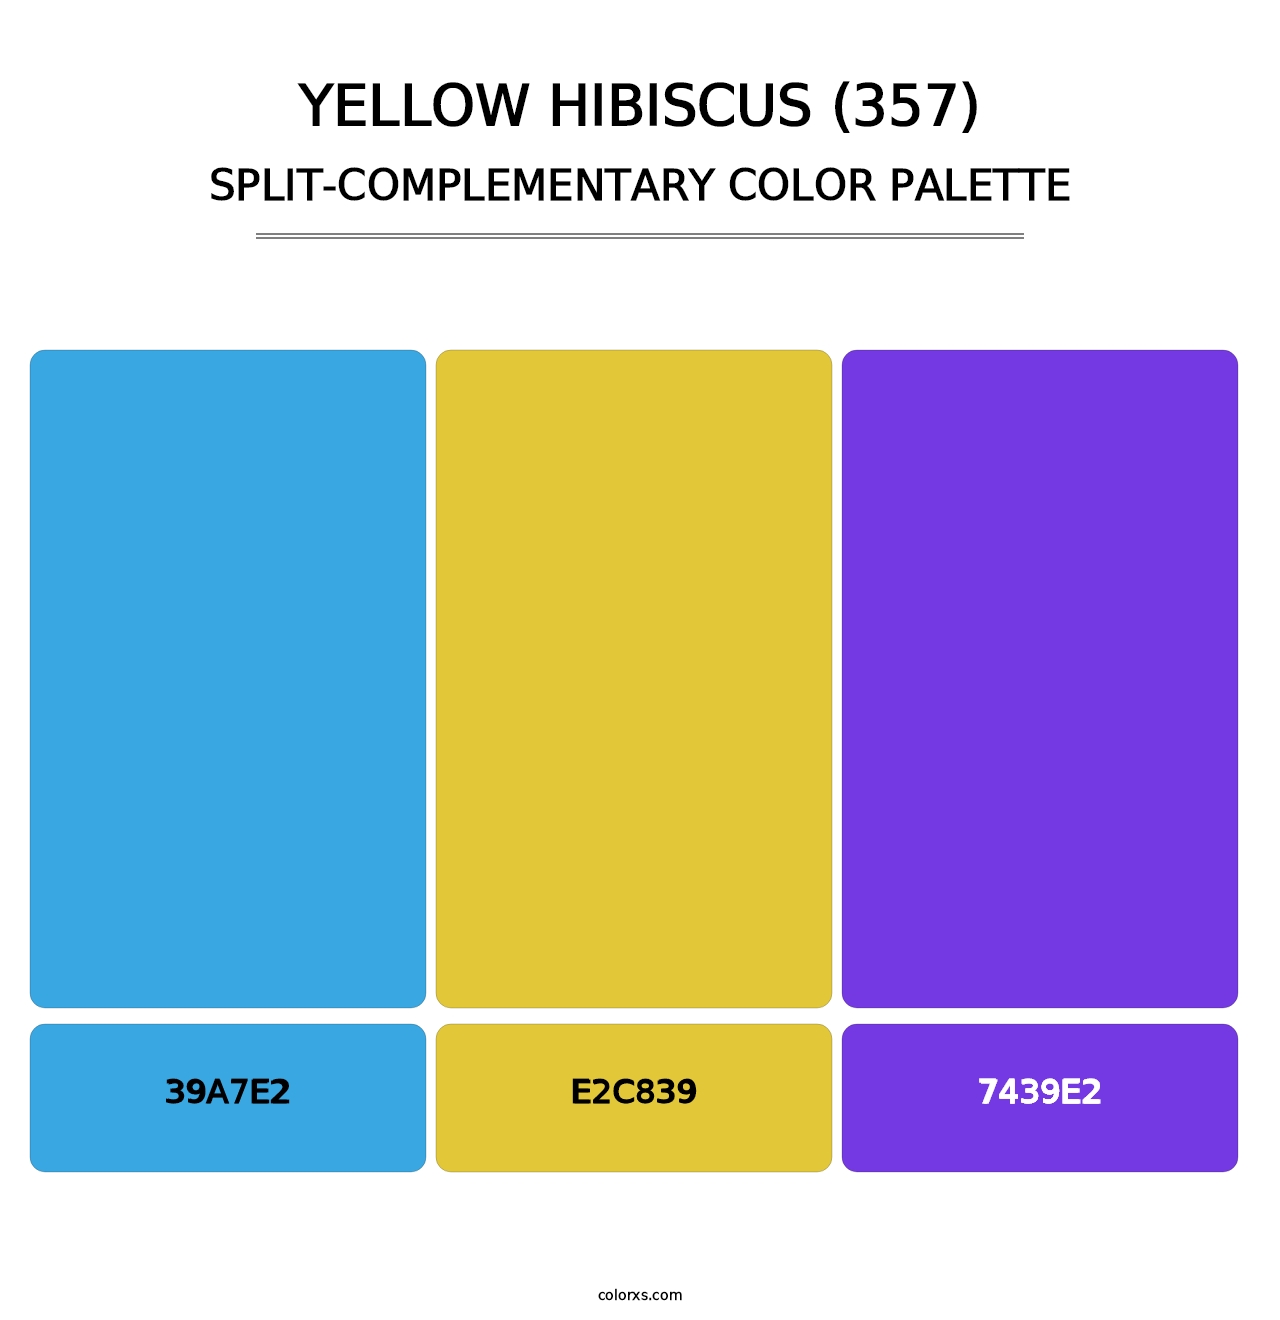 Yellow Hibiscus (357) - Split-Complementary Color Palette